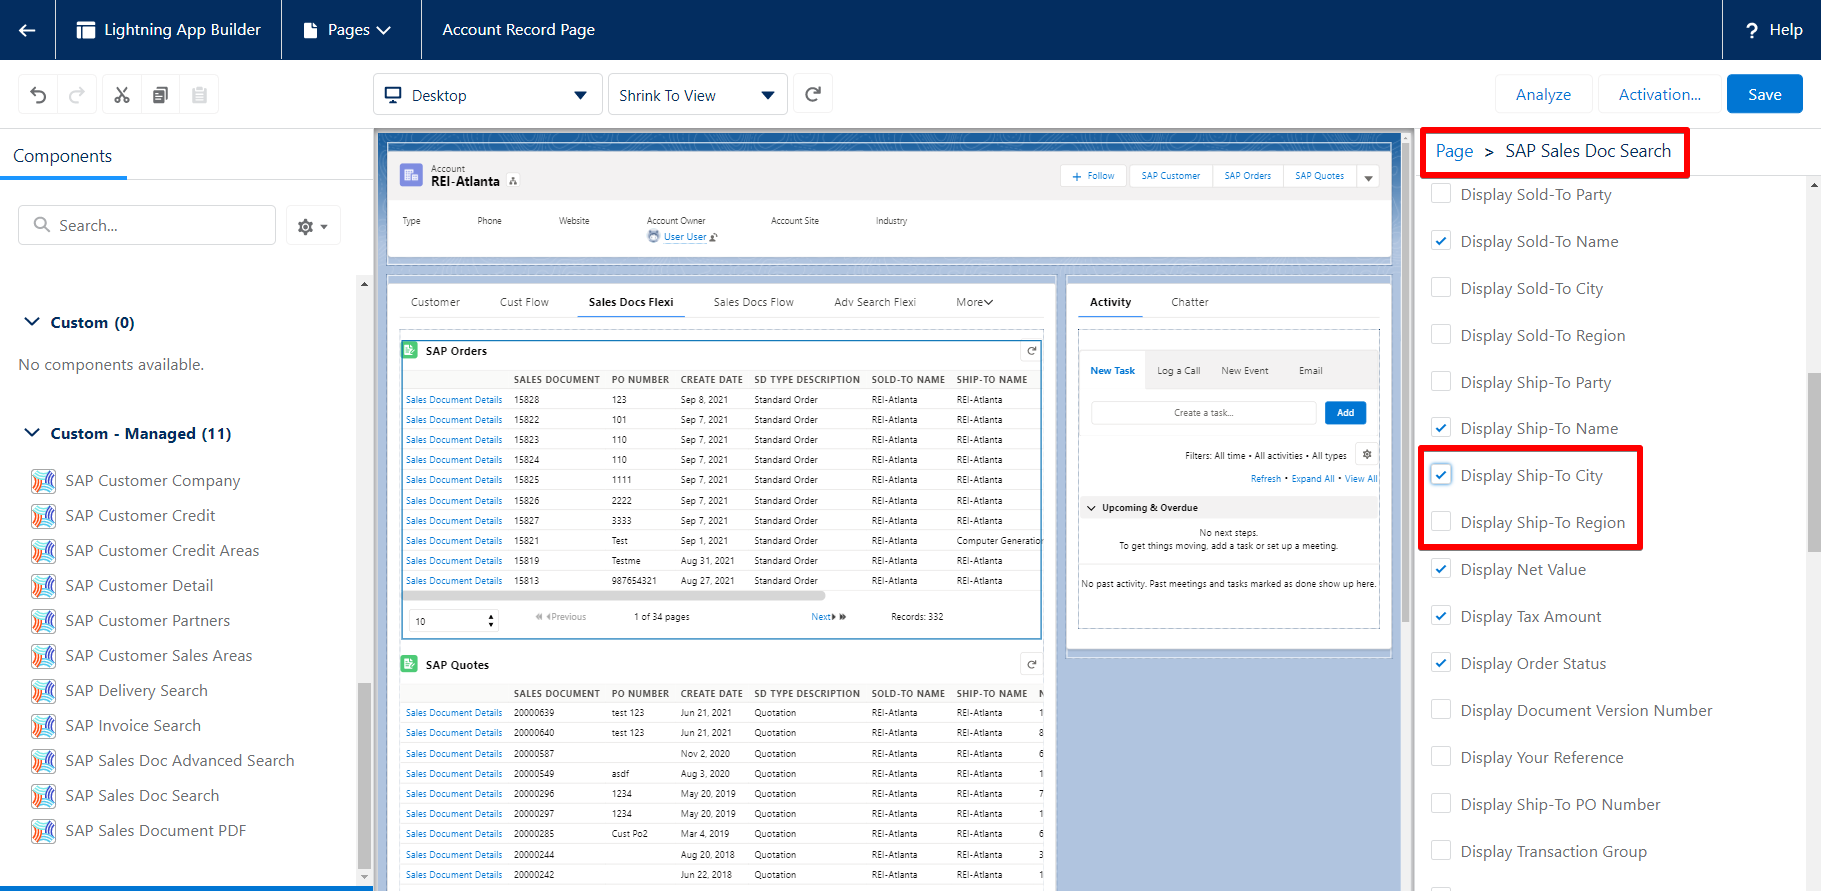 FlexiPage: SAP Sales Doc Search on account page